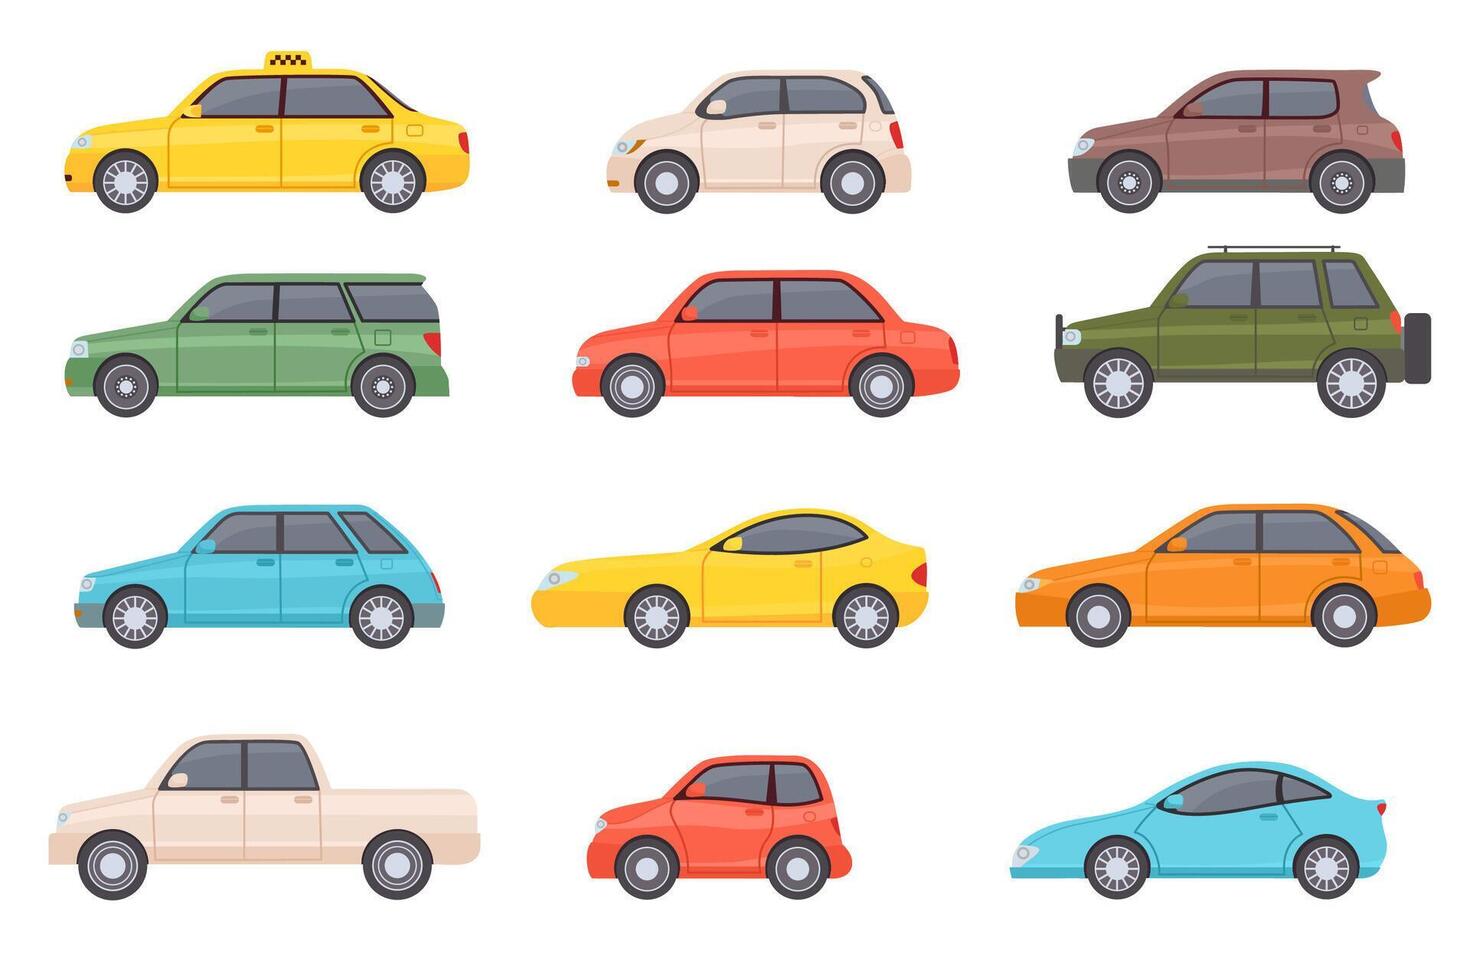 Flat cars. Cartoon vehicle side view. Taxi, minivan, mini car, suv and pickup truck. City auto transport icons. Automobile design vector set